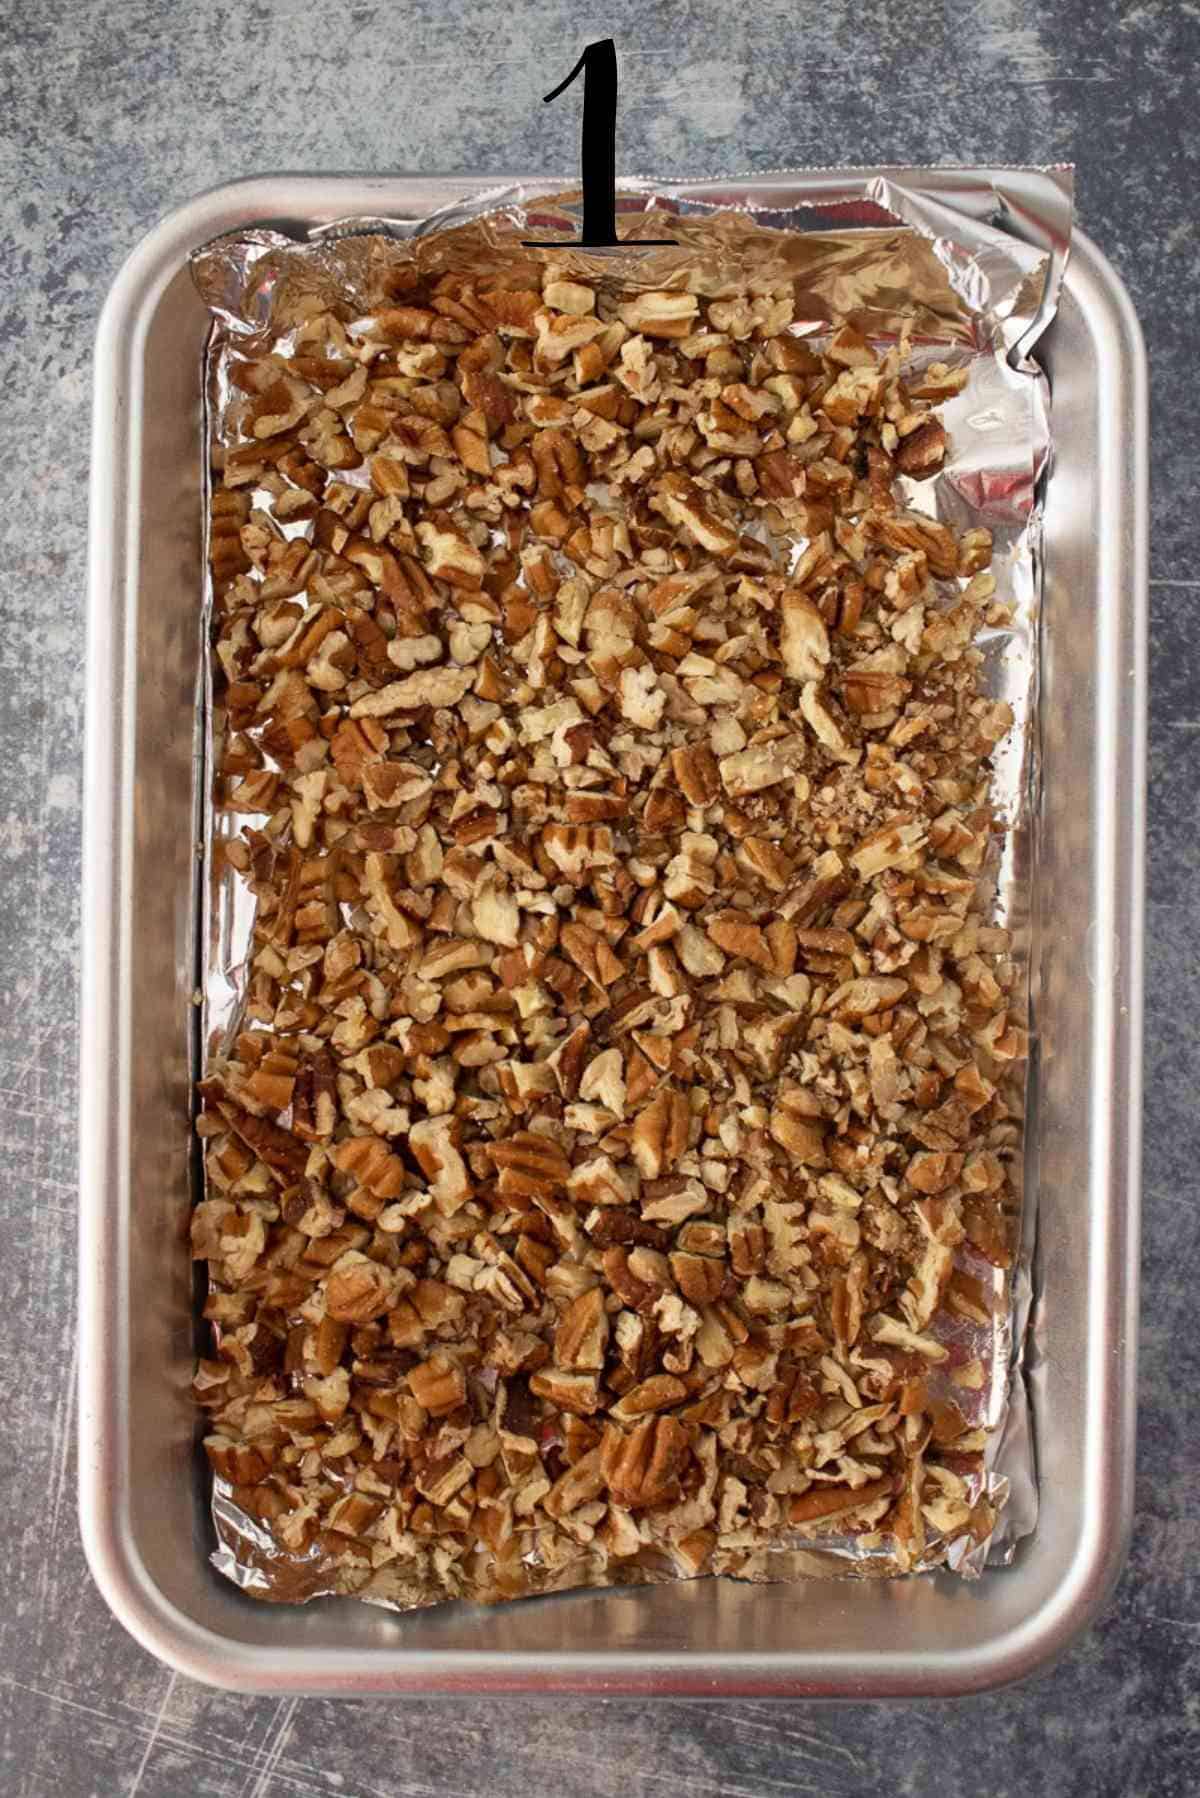 Toasted pecans on a baking sheet.